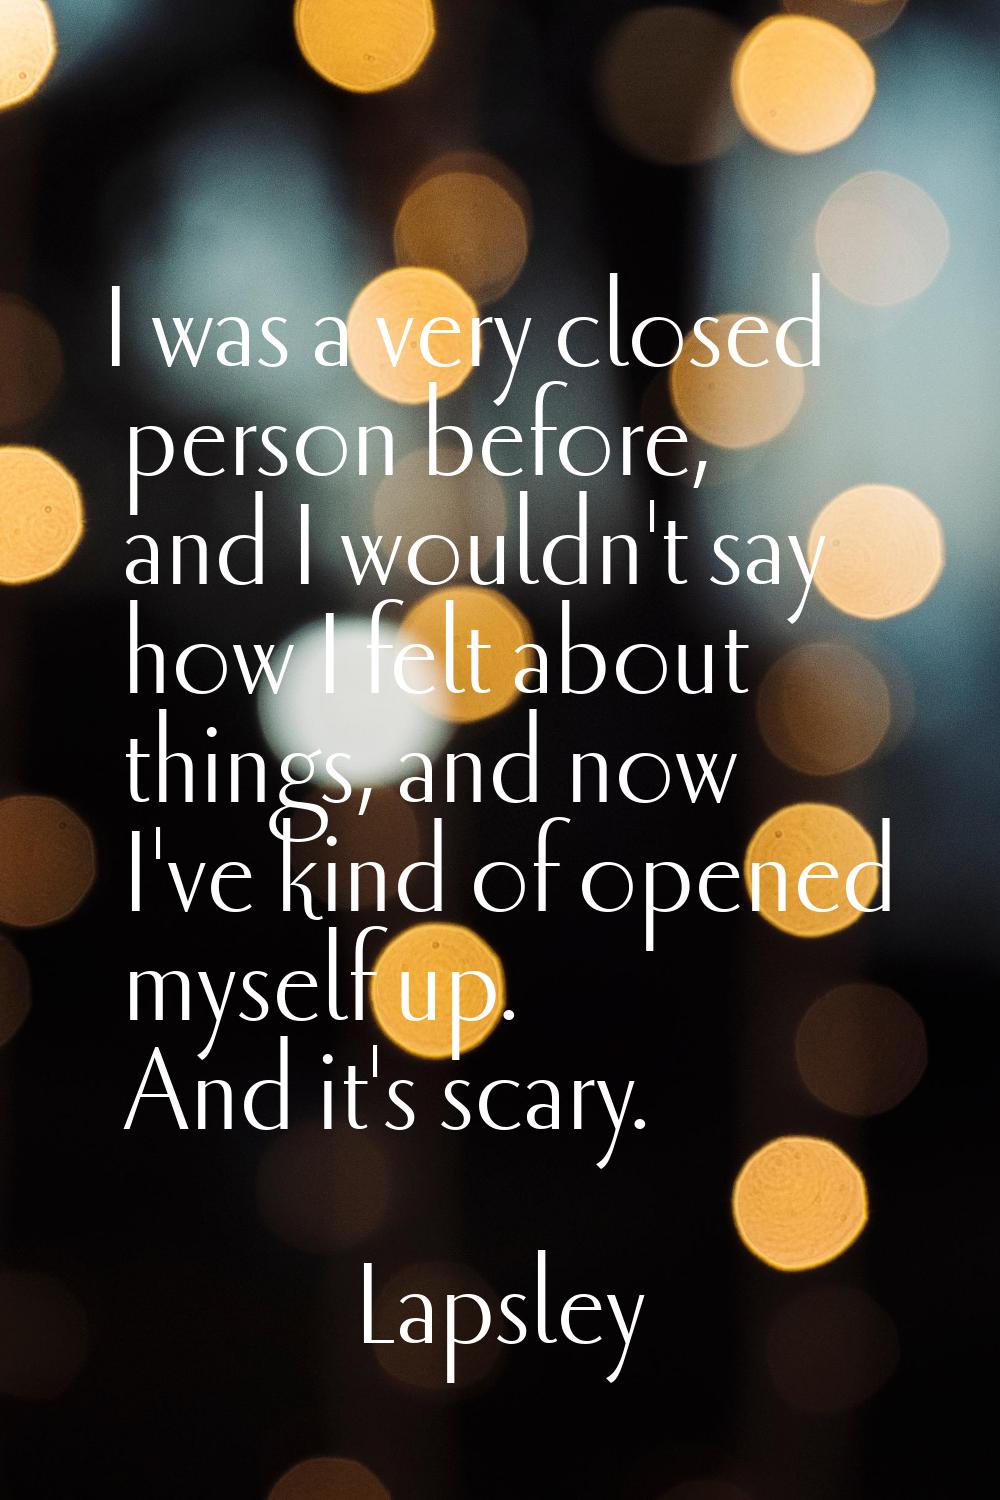 I was a very closed person before, and I wouldn't say how I felt about things, and now I've kind of